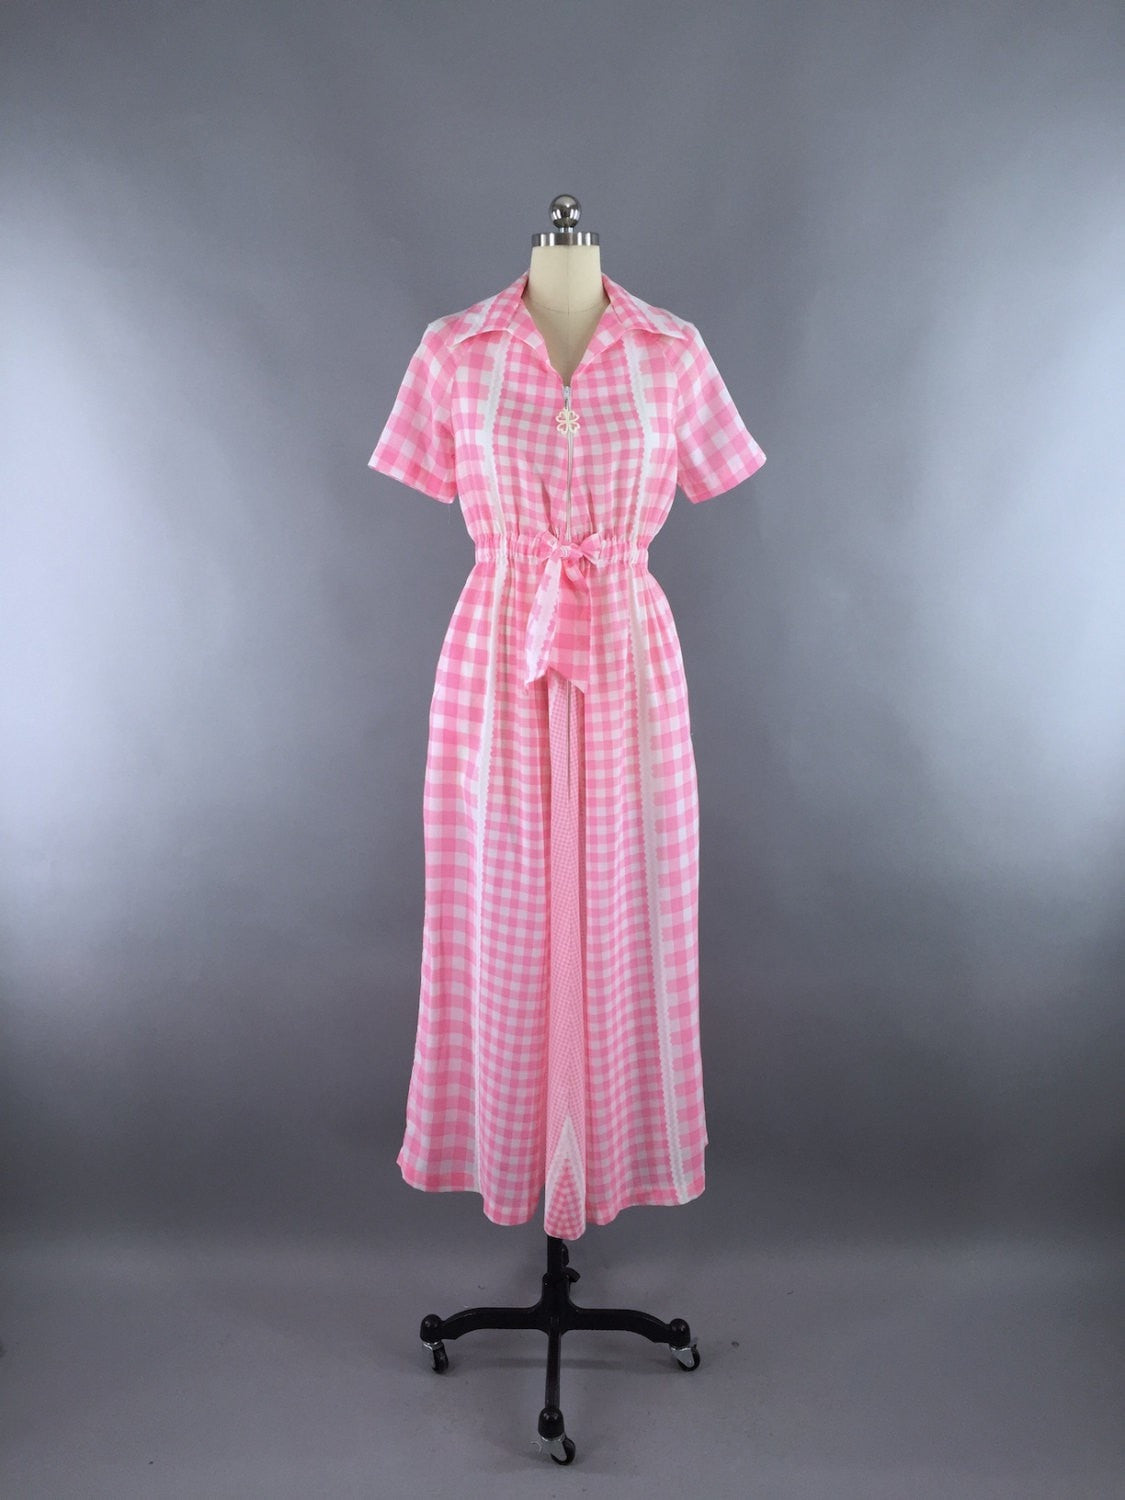 Vintage 1960s Hostess Dress with Pink Gingham Print - ThisBlueBird